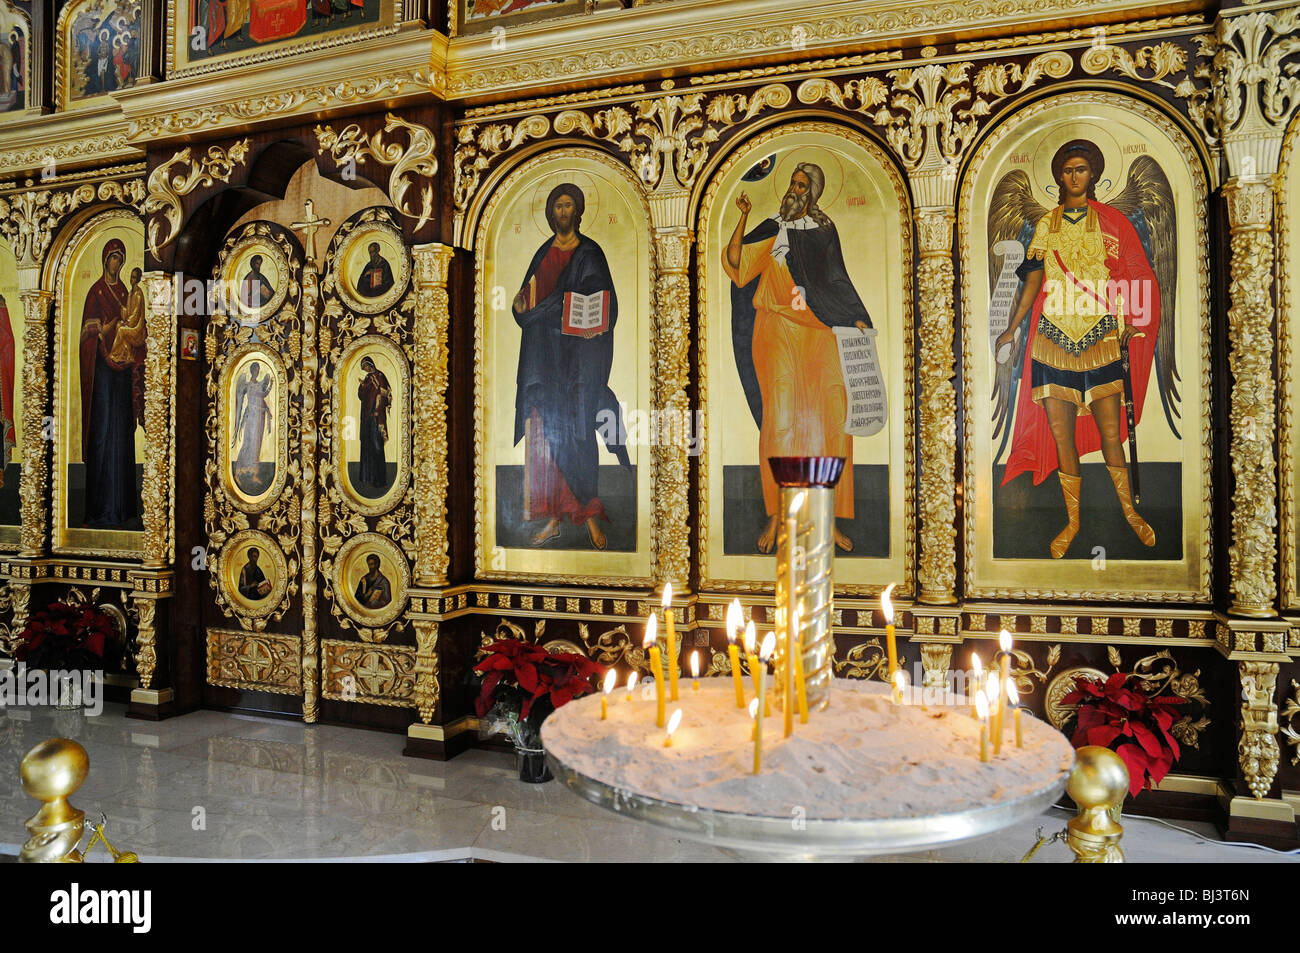 Icons, burning candles, Russian Orthodox Church, Altea, Costa Blanca, Alicante province, Spain, Europe Stock Photo